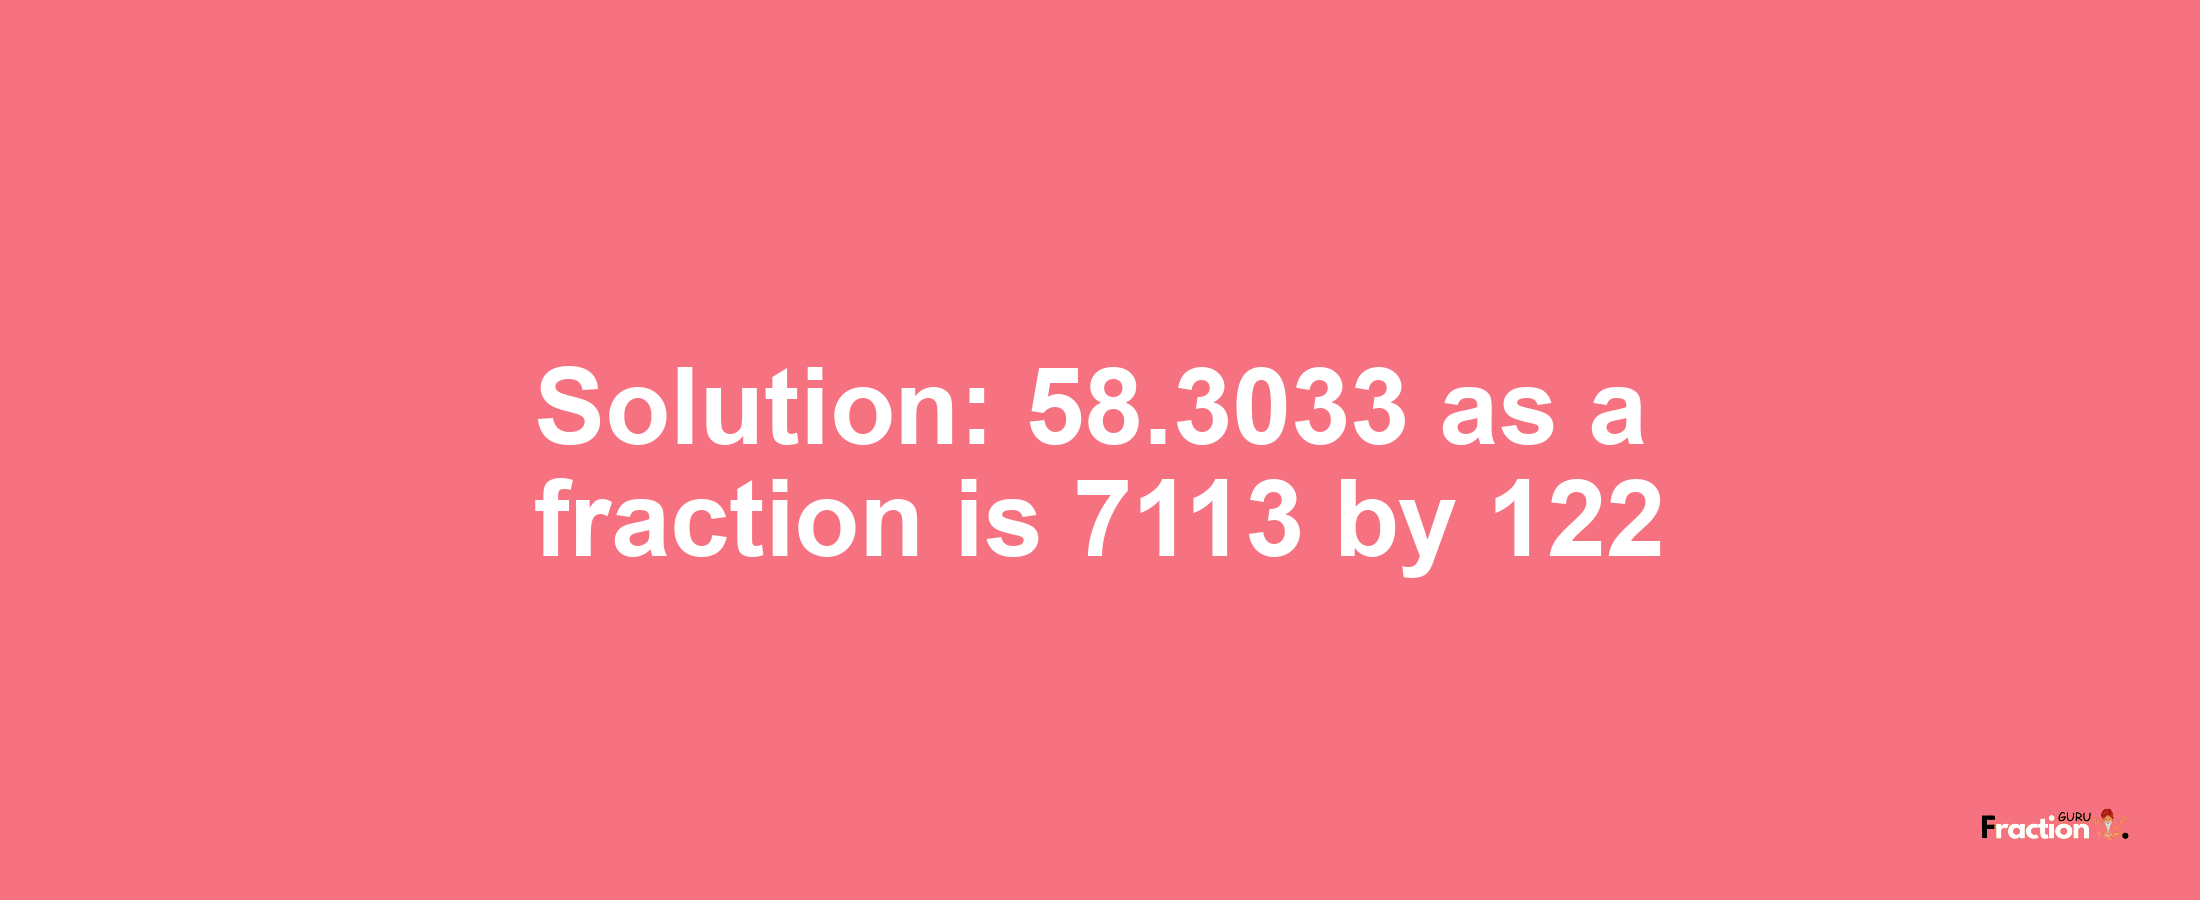 Solution:58.3033 as a fraction is 7113/122